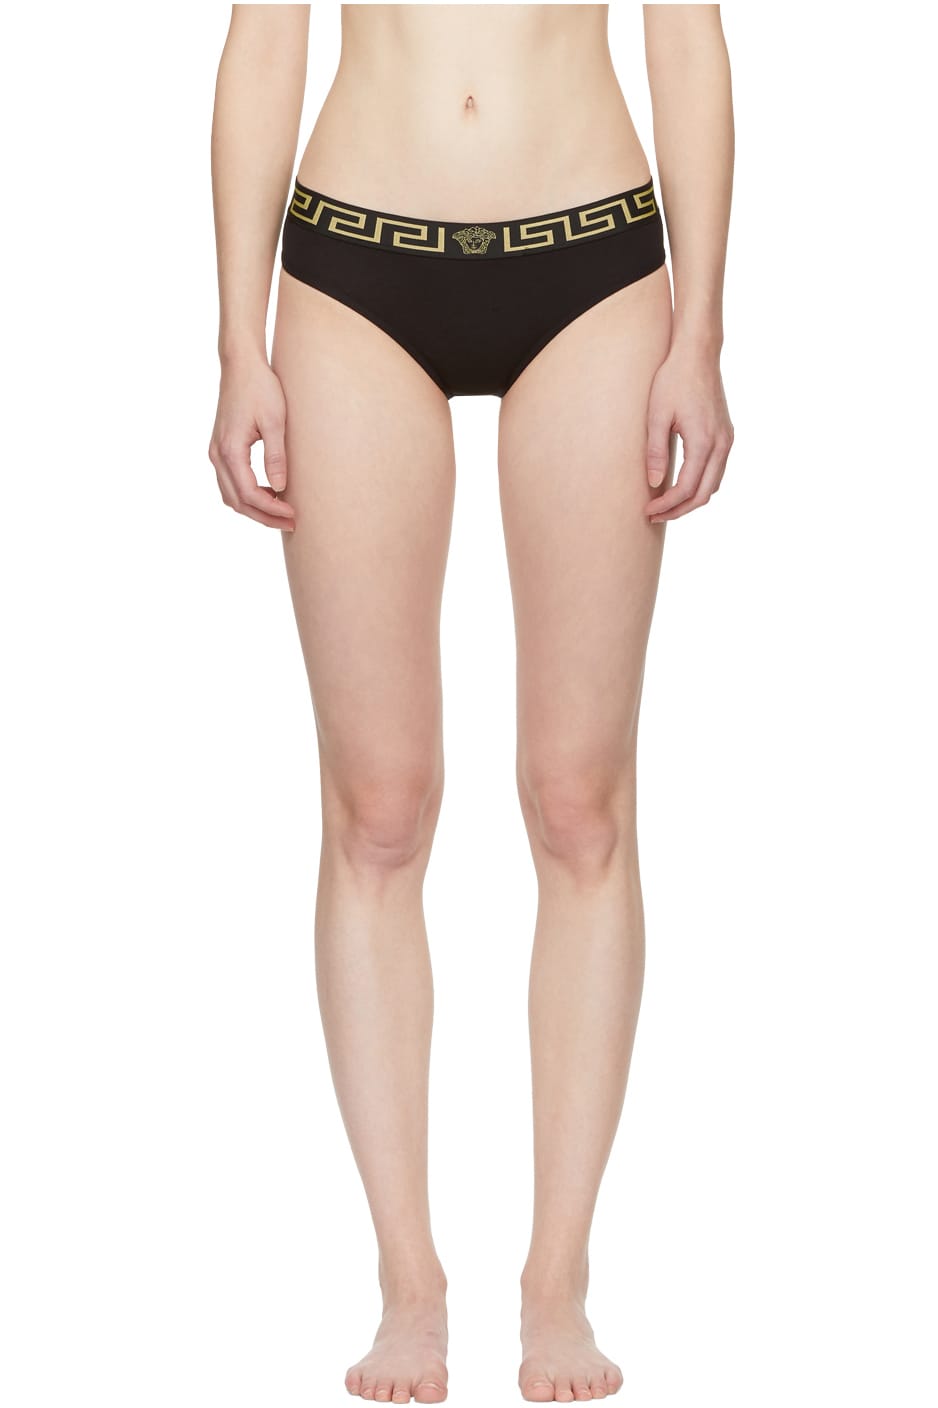 Versace Drops Black and Gold Underwear 